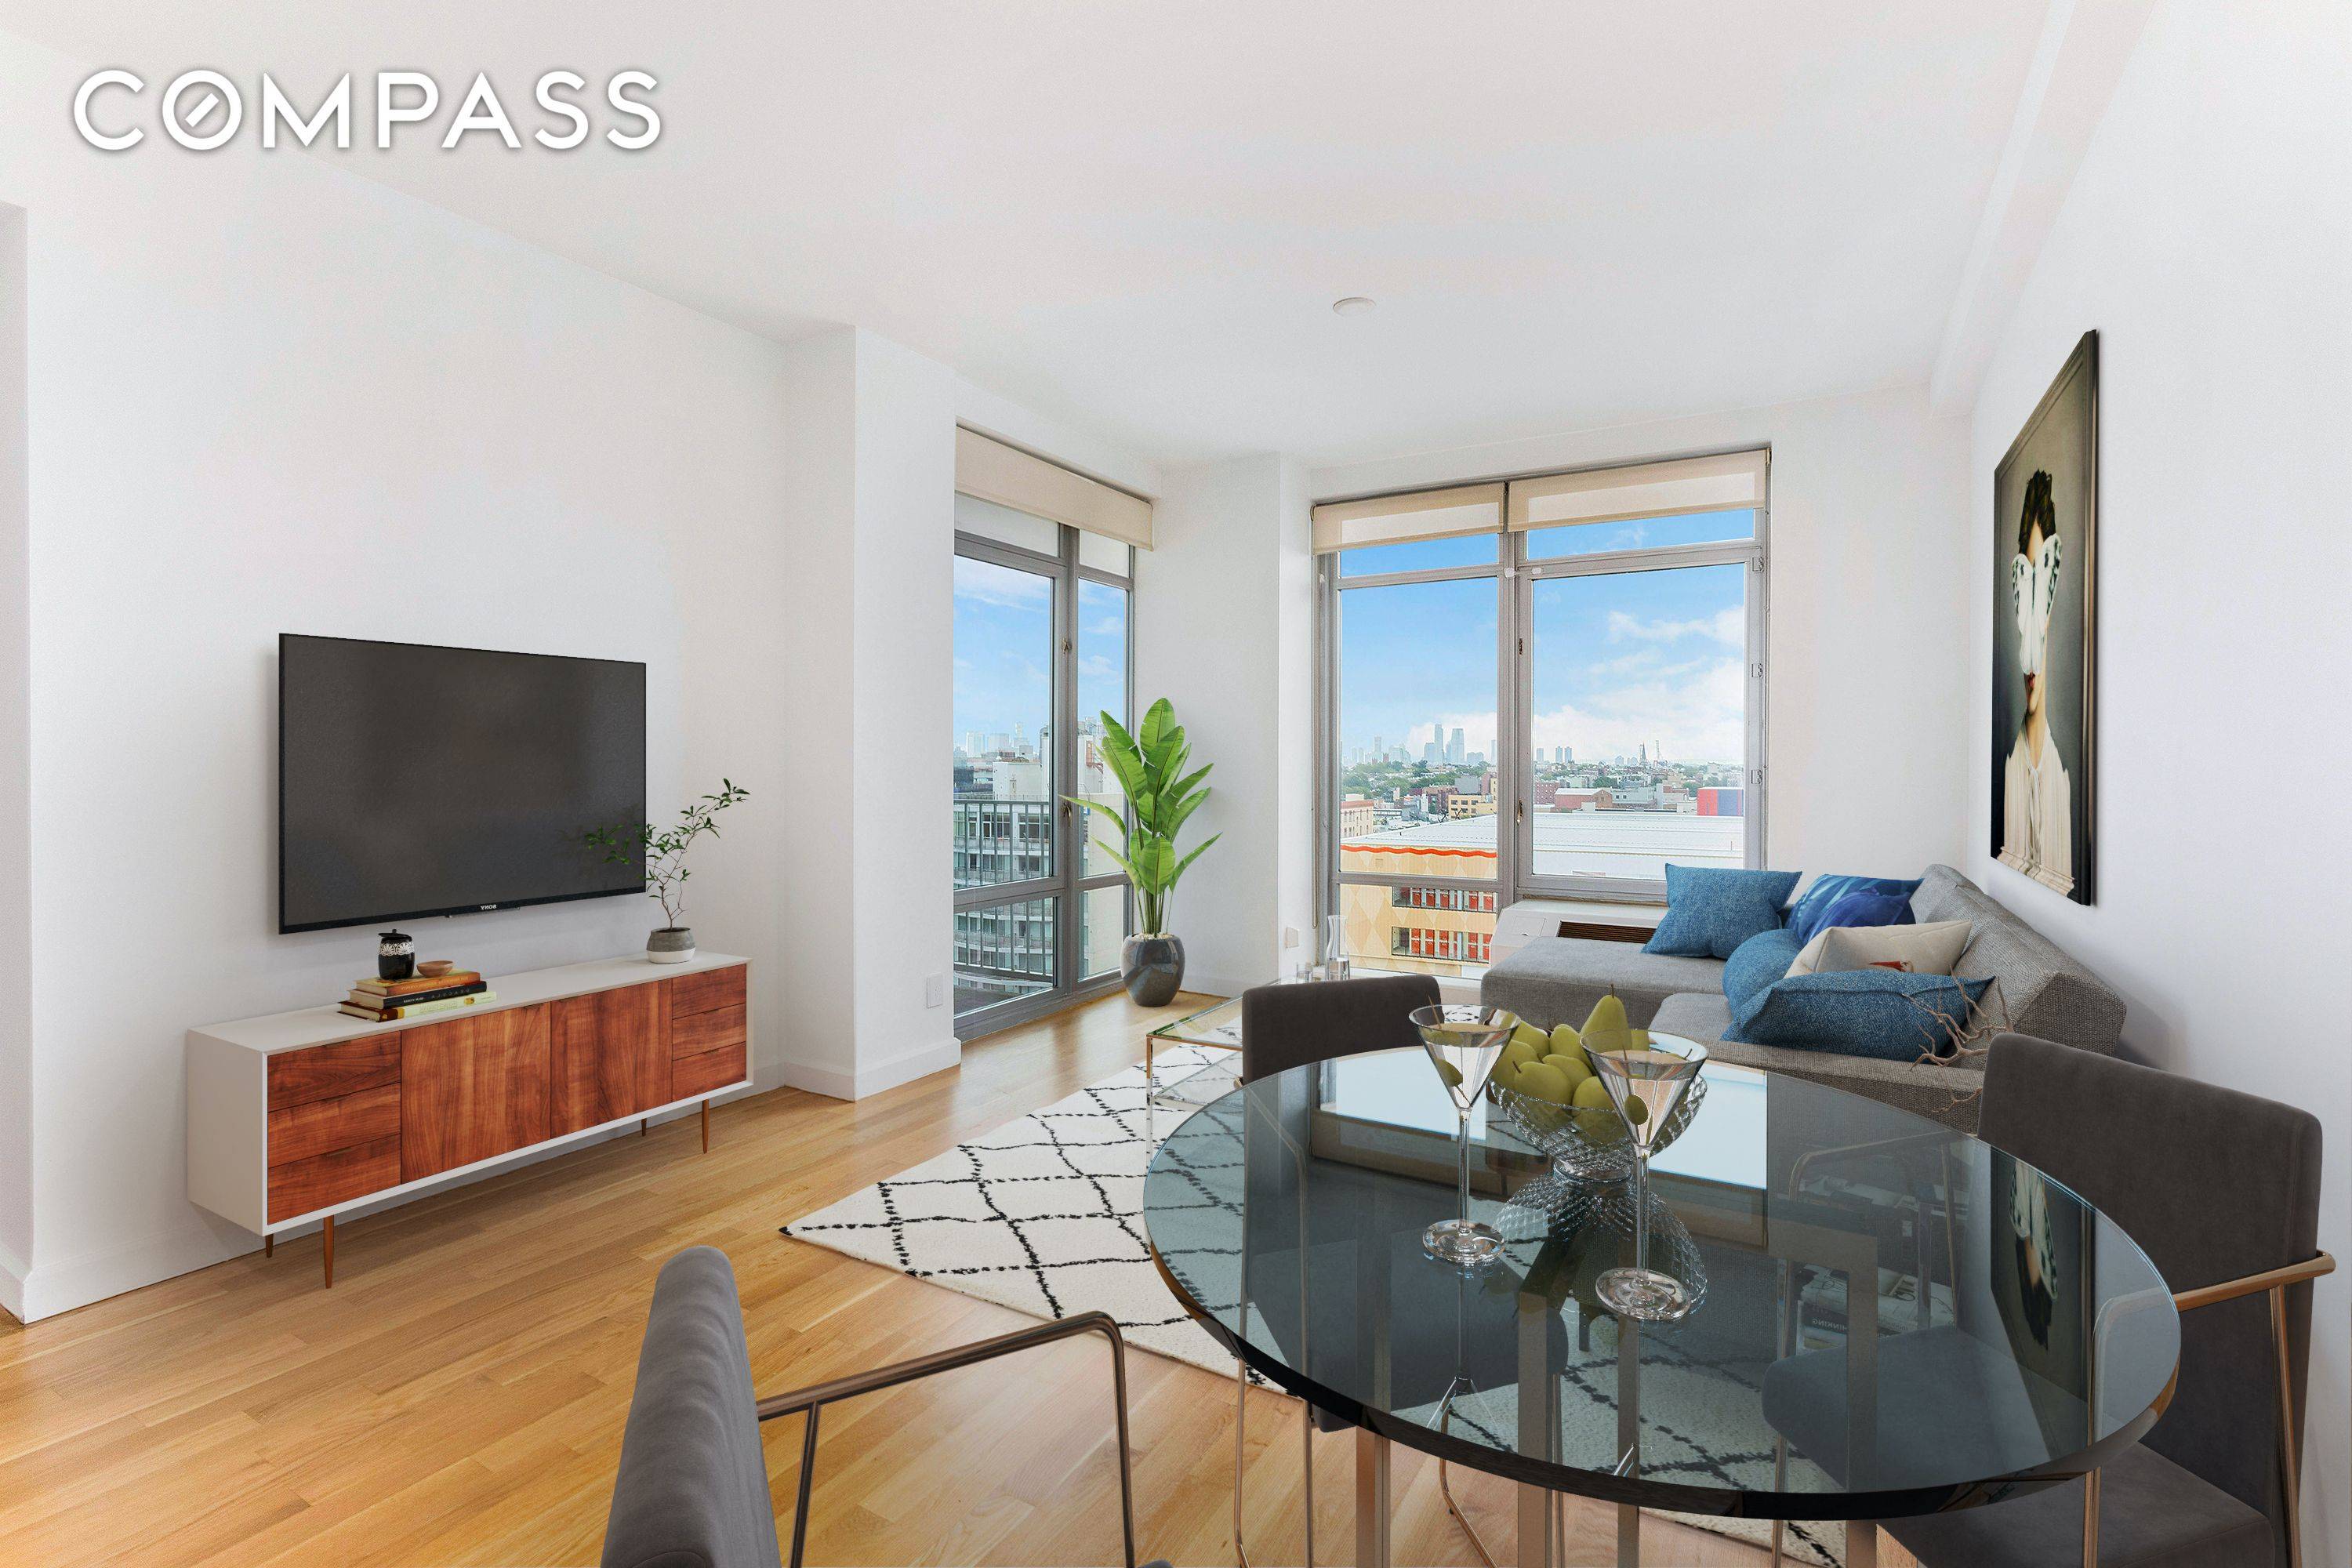 The Landmark Park Slope Spacious, 2BD 2BA with Private Balcony, Floor To Ceiling Windows, Gourmet Kitchen with Stainless Steel Appliances, Washer Dryer in a Luxury Doorman Building with Roof Deck, ...